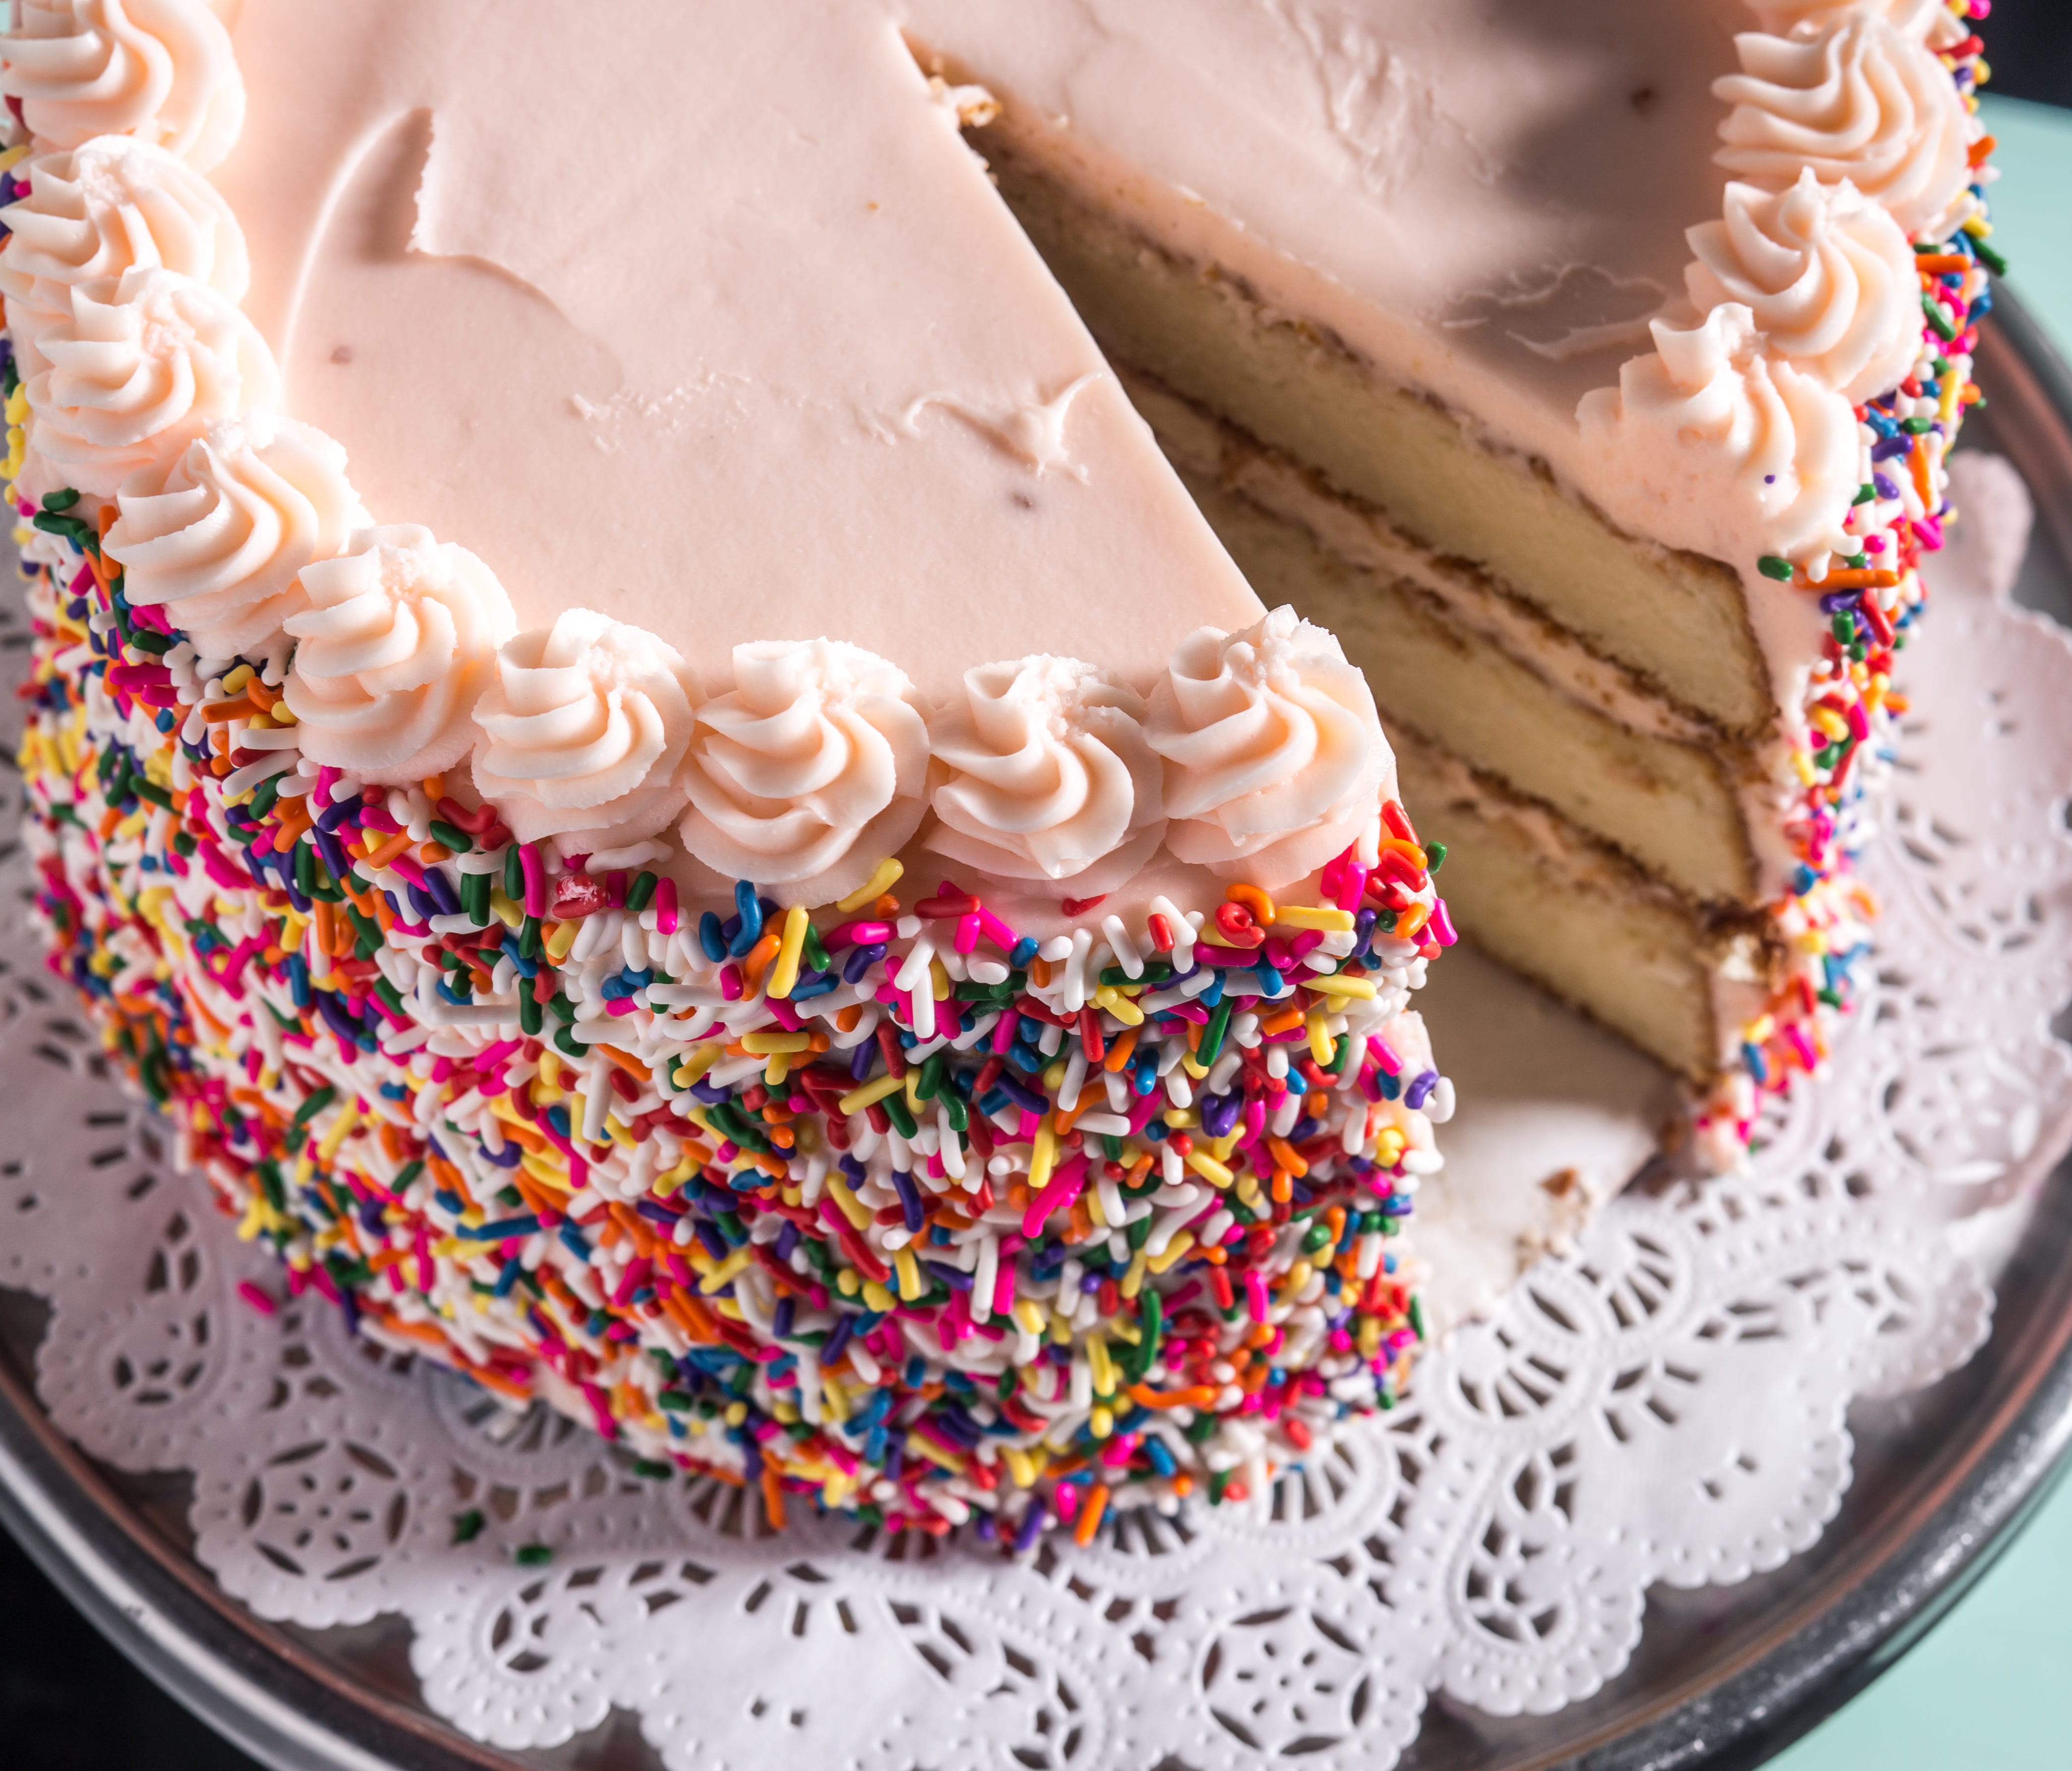 In Brooklyn, the birthday cake business is strong at Butter & Scotch, a bakery and full-service bar. The show-stopping birthday cake stands a whopping 9 inches tall with three vanilla layers, pink icing and rainbow sprinkles galore.